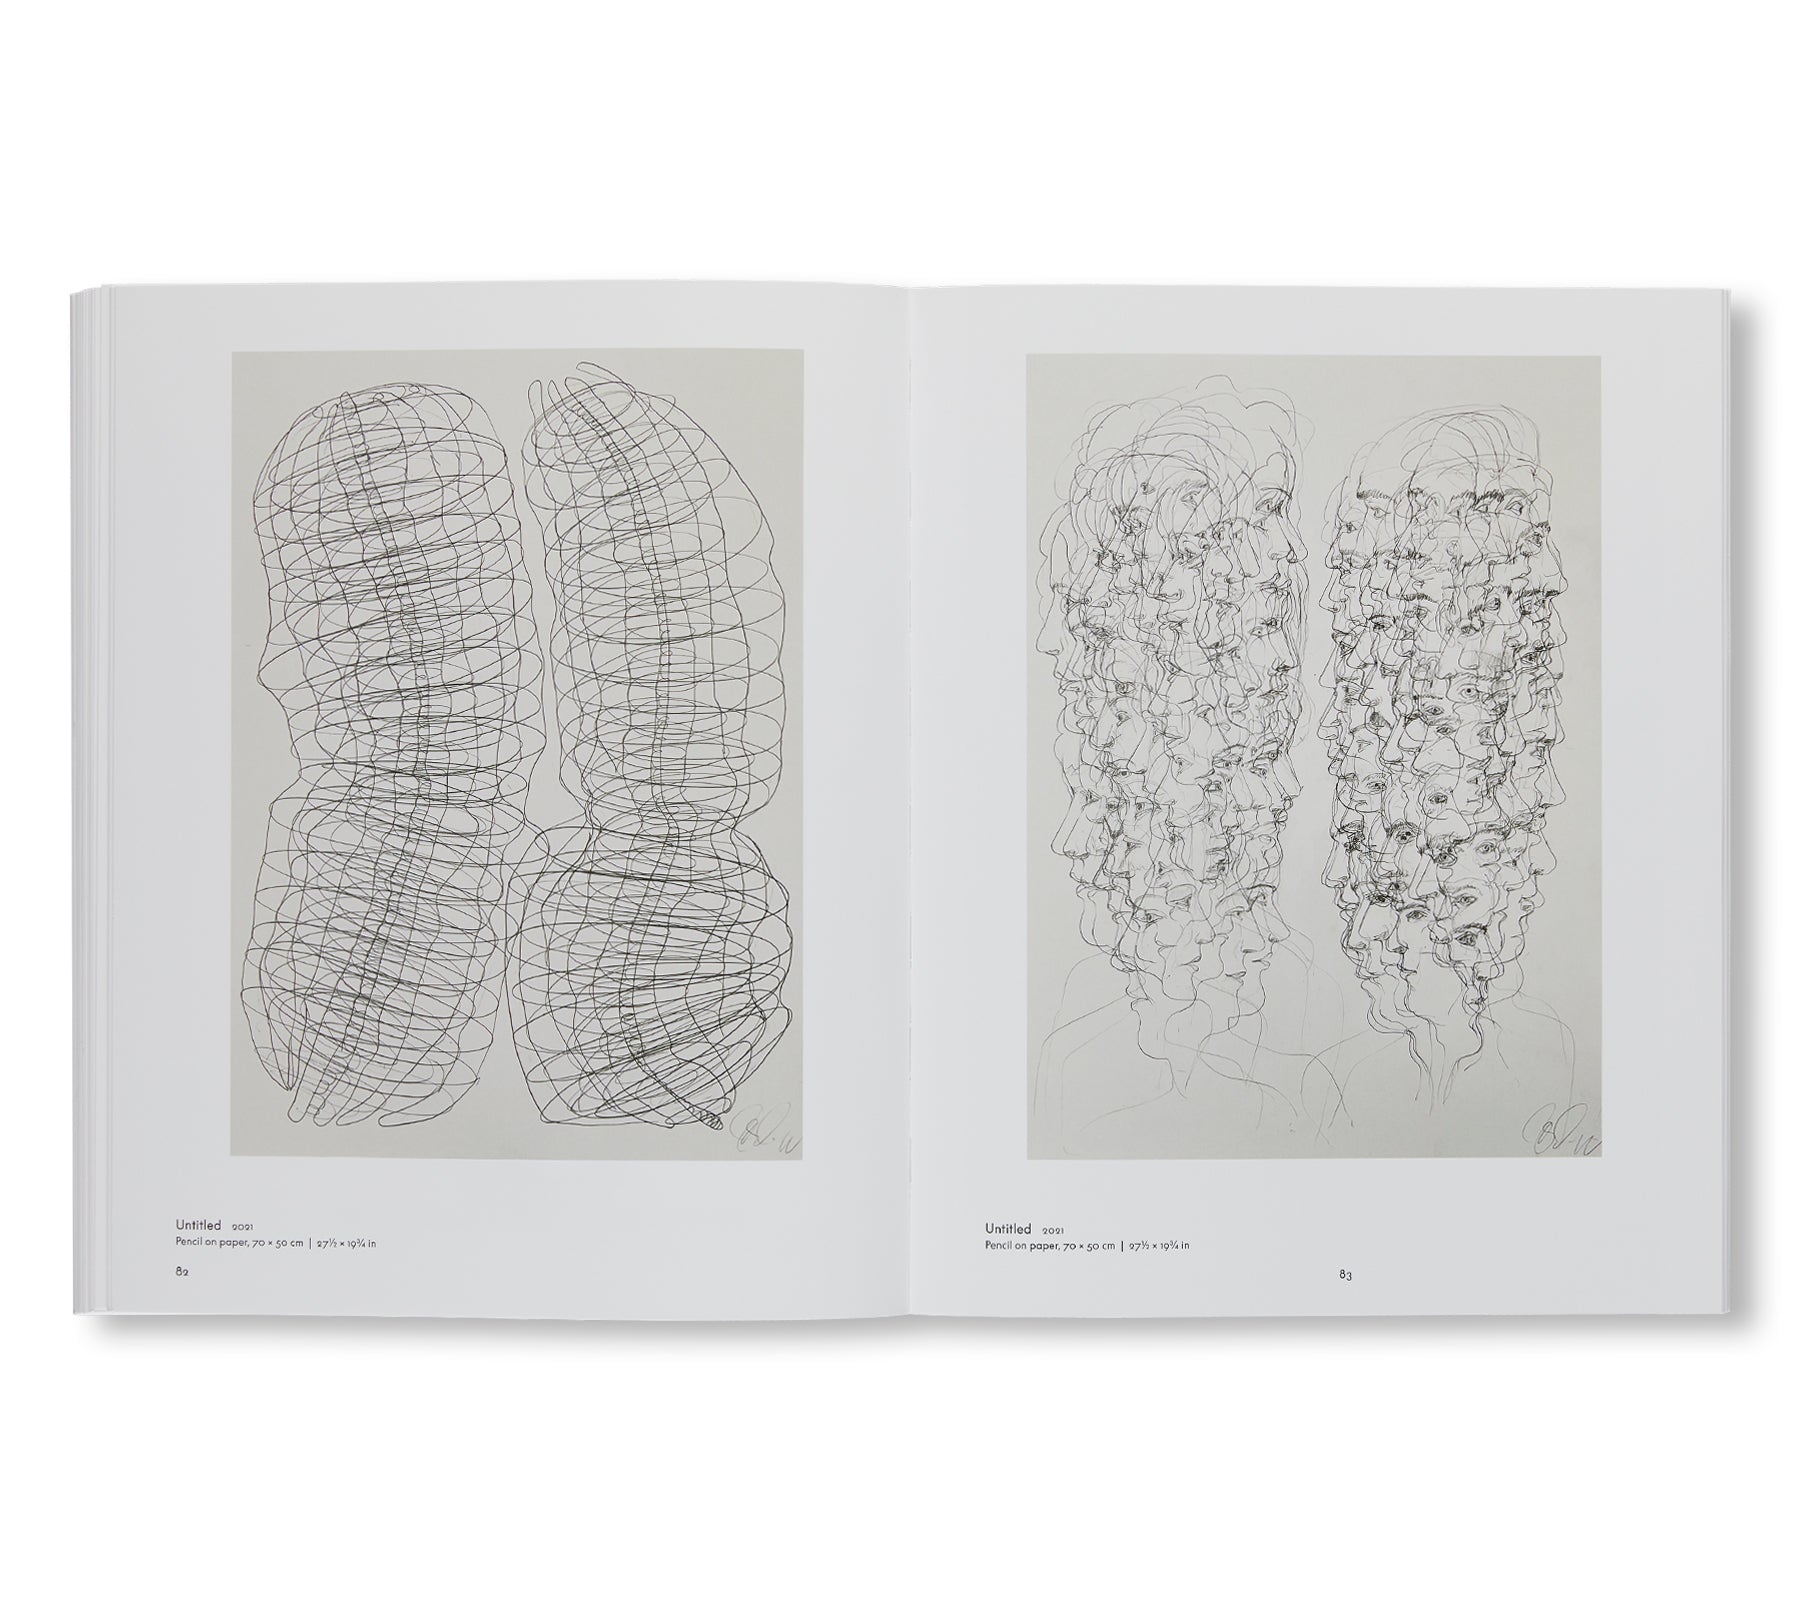 SCULPTURES AND WORKS ON PAPER by Tony Cragg